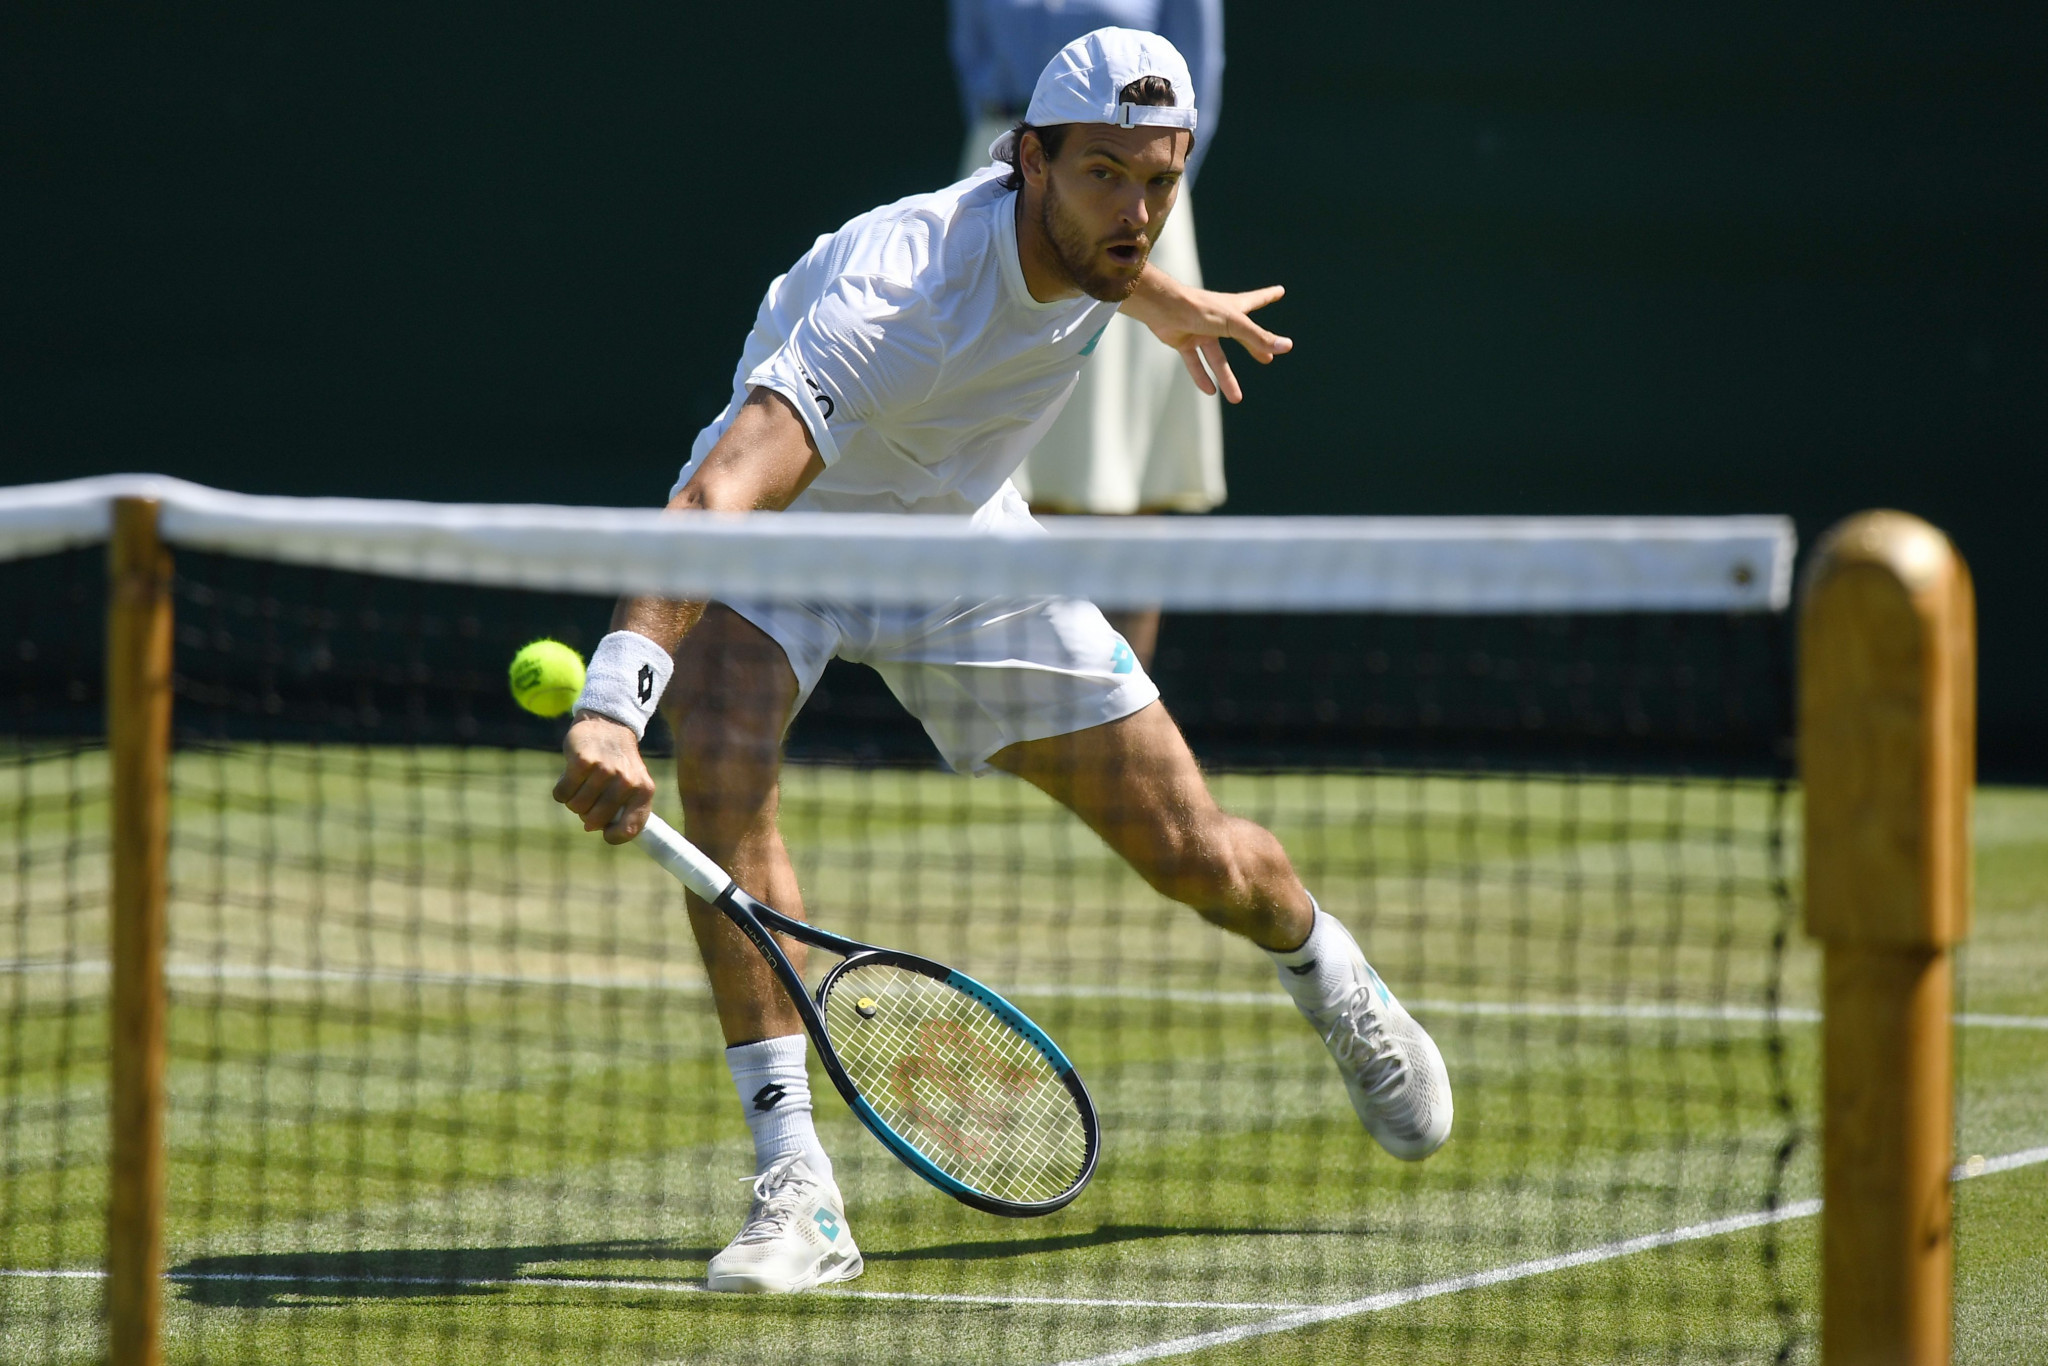 Joao Sousa caused an upset as he beat 13th seed Marin Cilic ©Getty Images